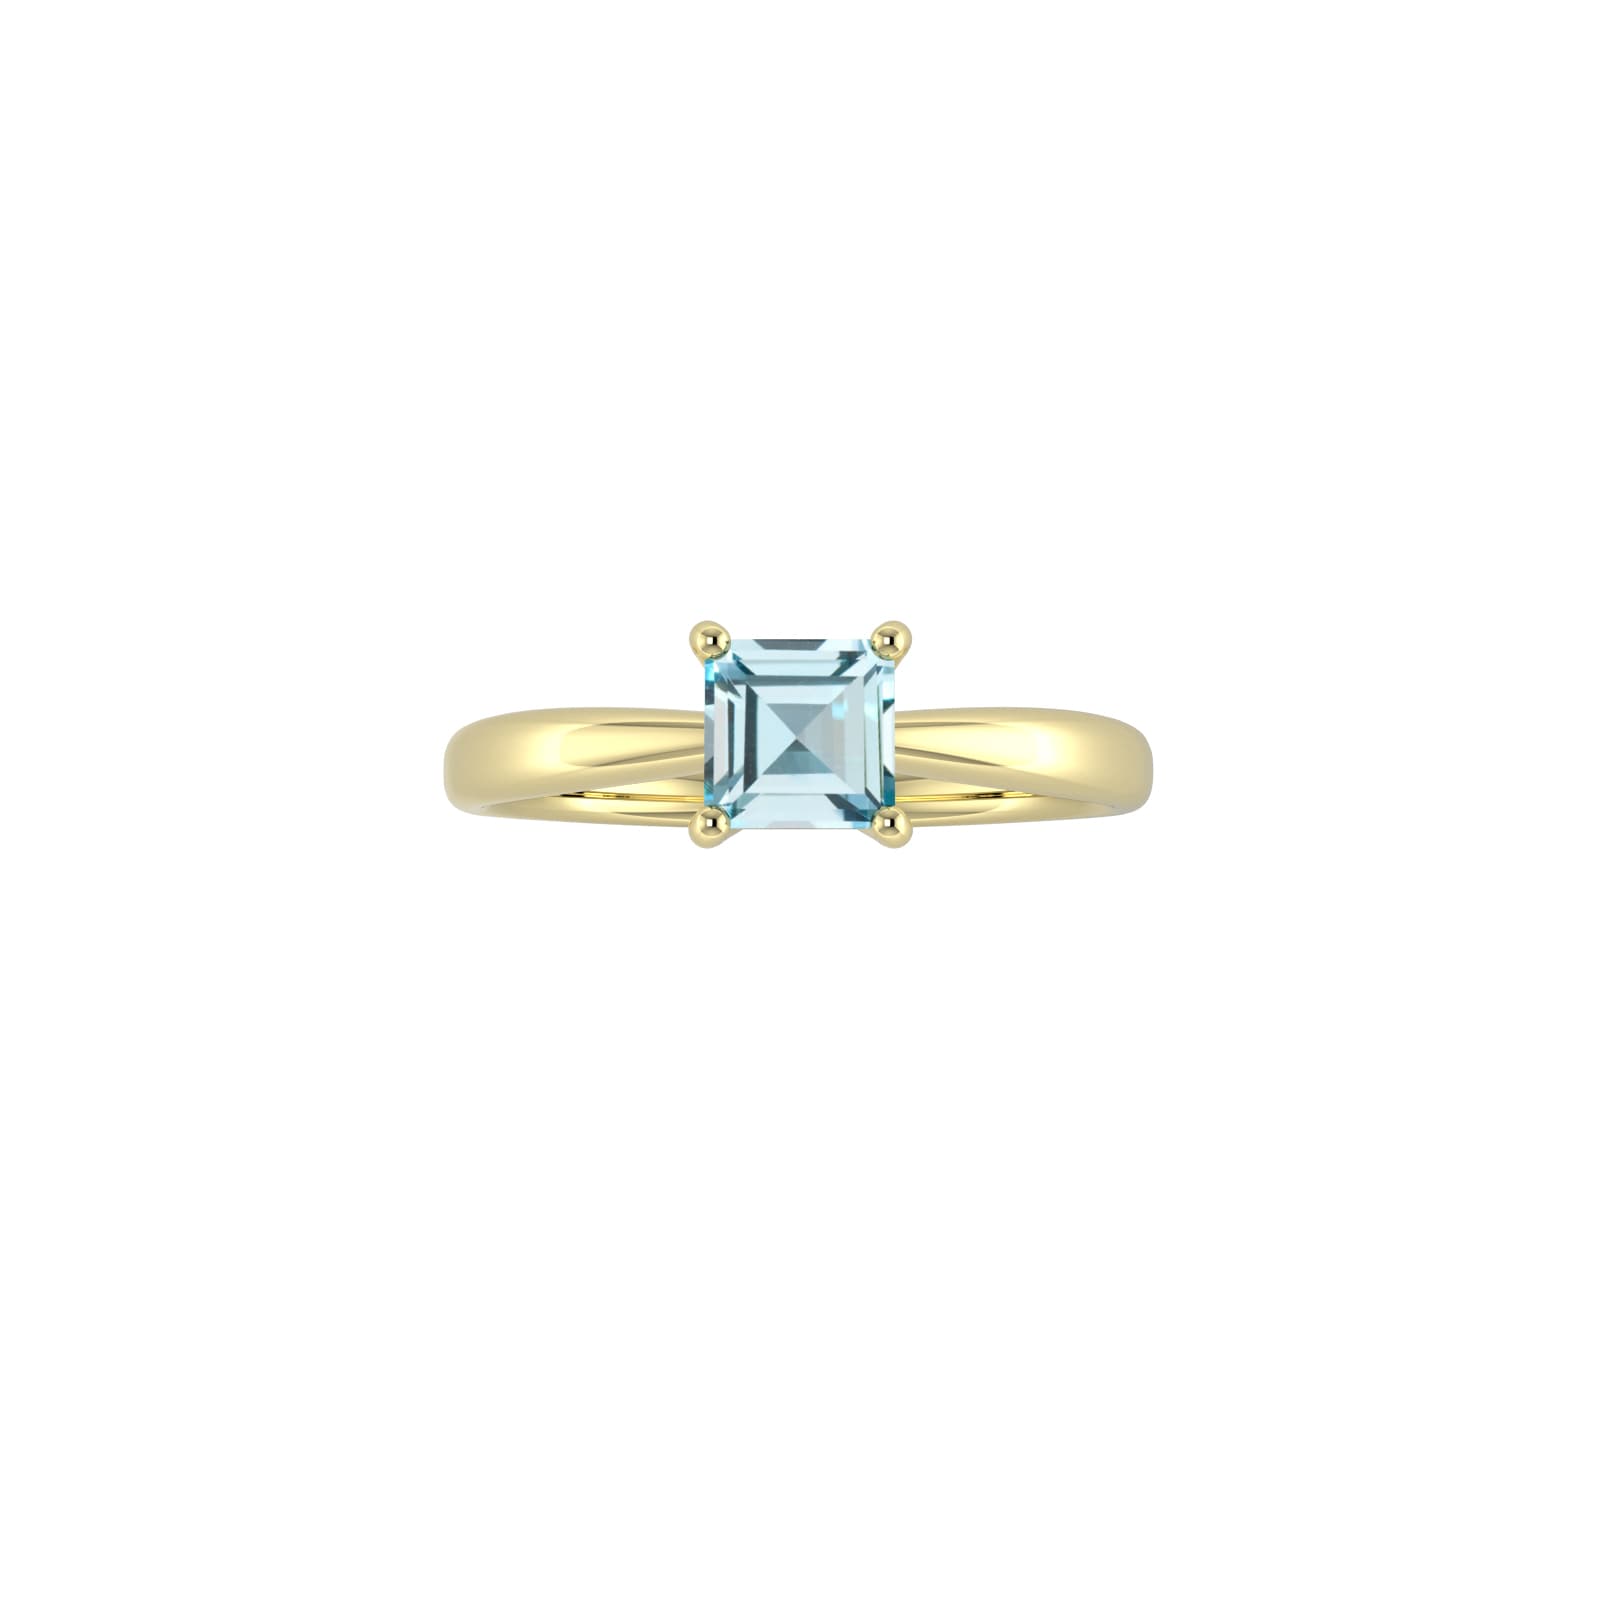 9ct Yellow Gold 4 Claw Square Aquamarine 5mm x 5mm Ring- Ring Size I.5